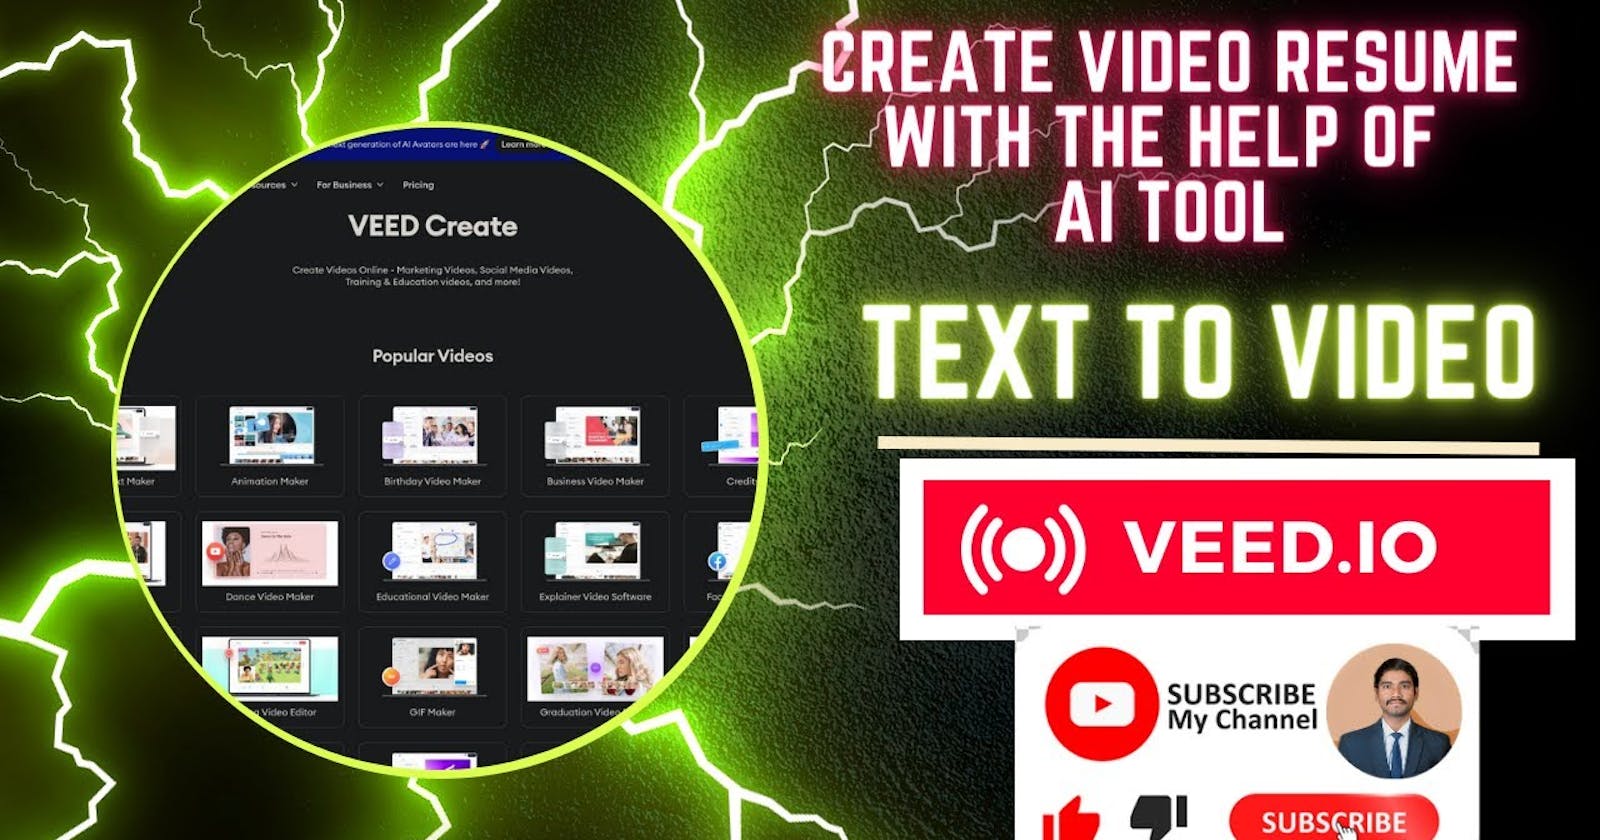 Create an Impressive Video Resume with AI Tool: Veed.io's Text to Video Feature